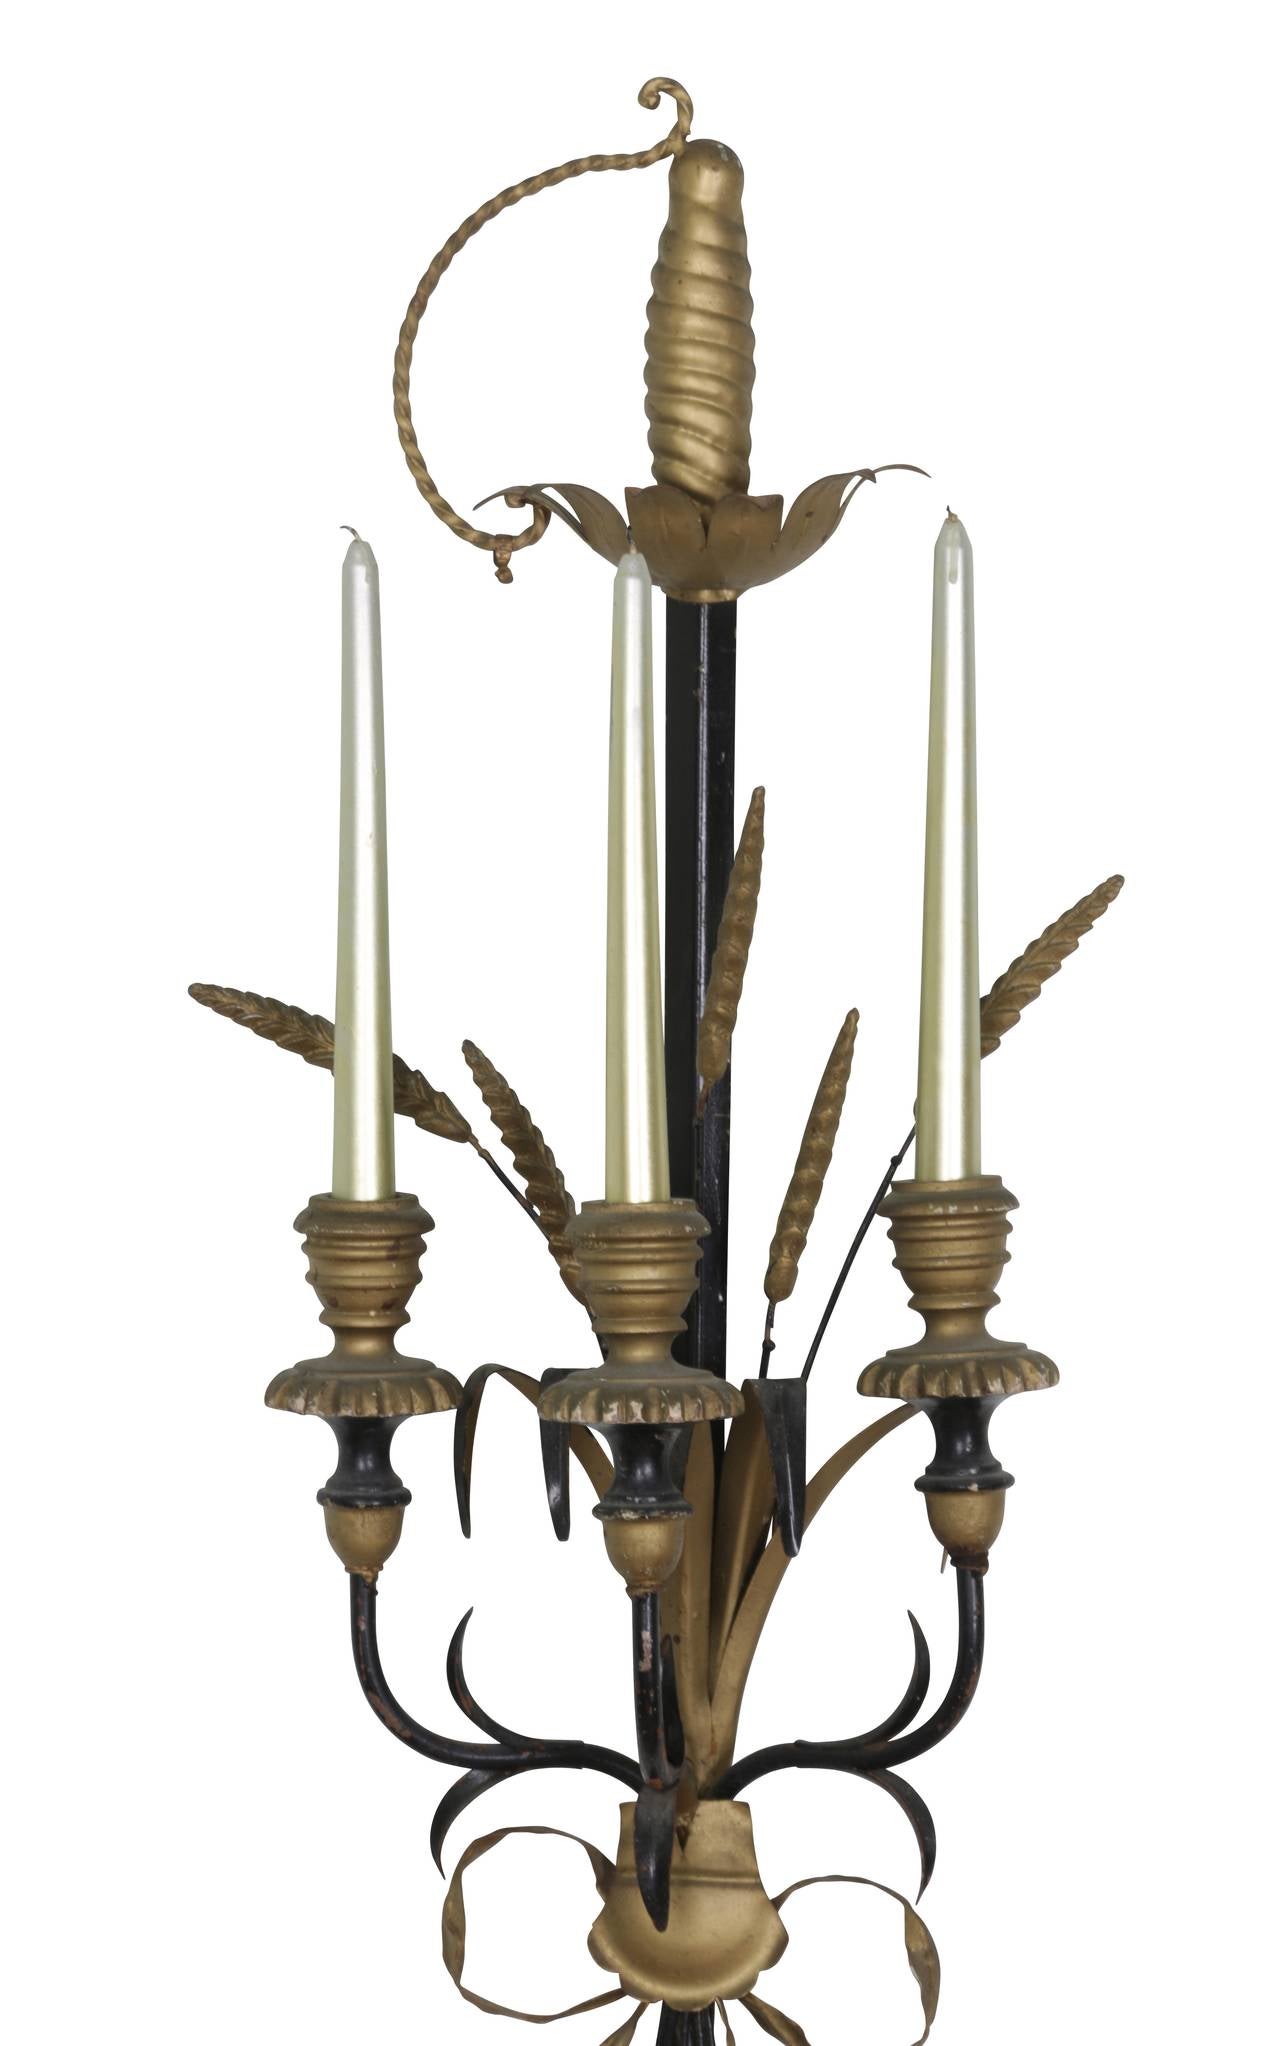 Fantastic pair of Italian tole and gold painted wood wall sconces fitted for candles. Adorned with swords and wheat, they retain the original metal Made in Italy tag. Sold as a pair showing a lot of natural wear from age and use. Candles not